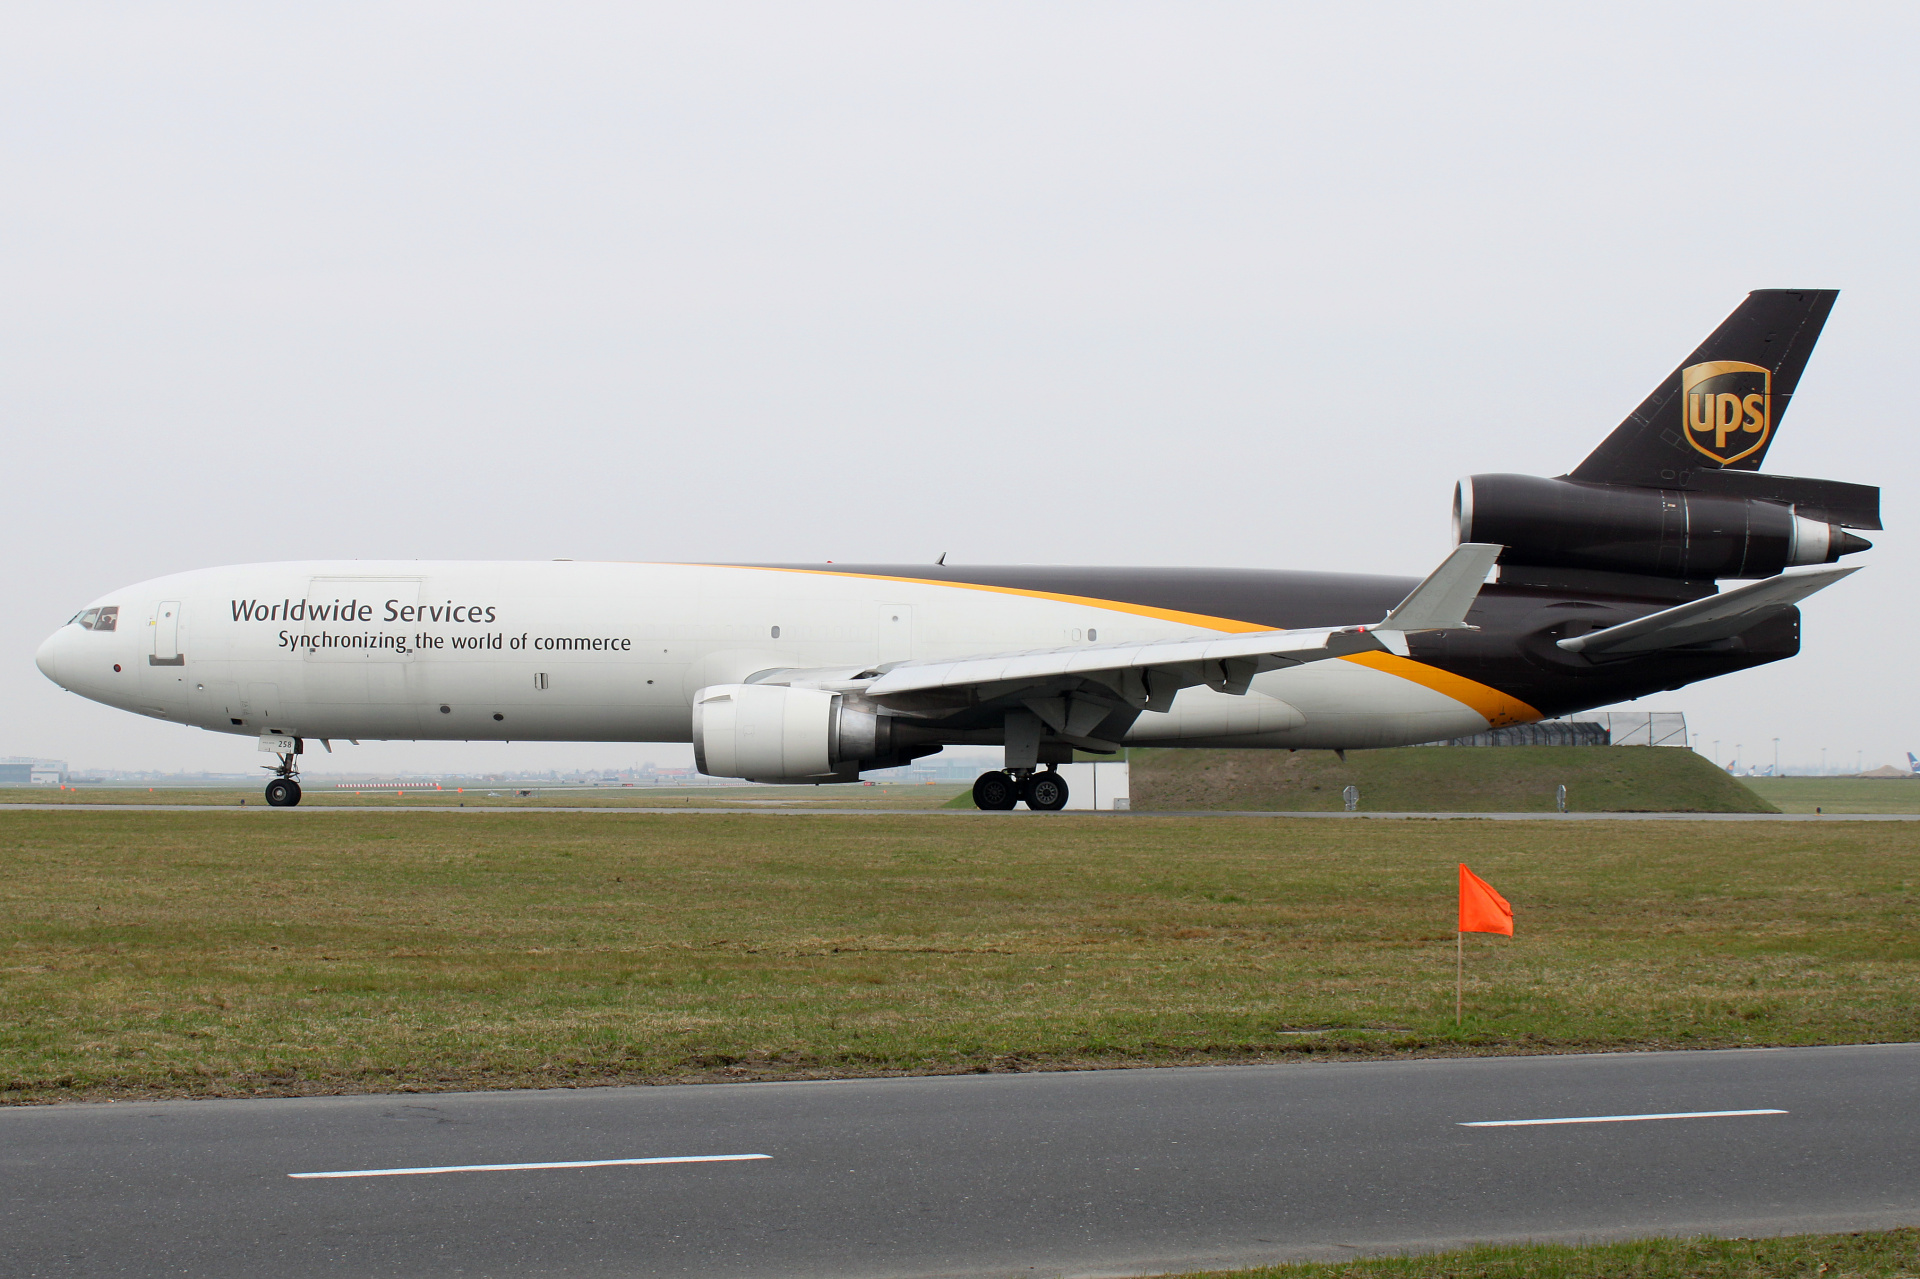 N258UP, United Parcel Service (UPS) Airlines (Aircraft » EPWA Spotting » McDonnell Douglas MD-11F)